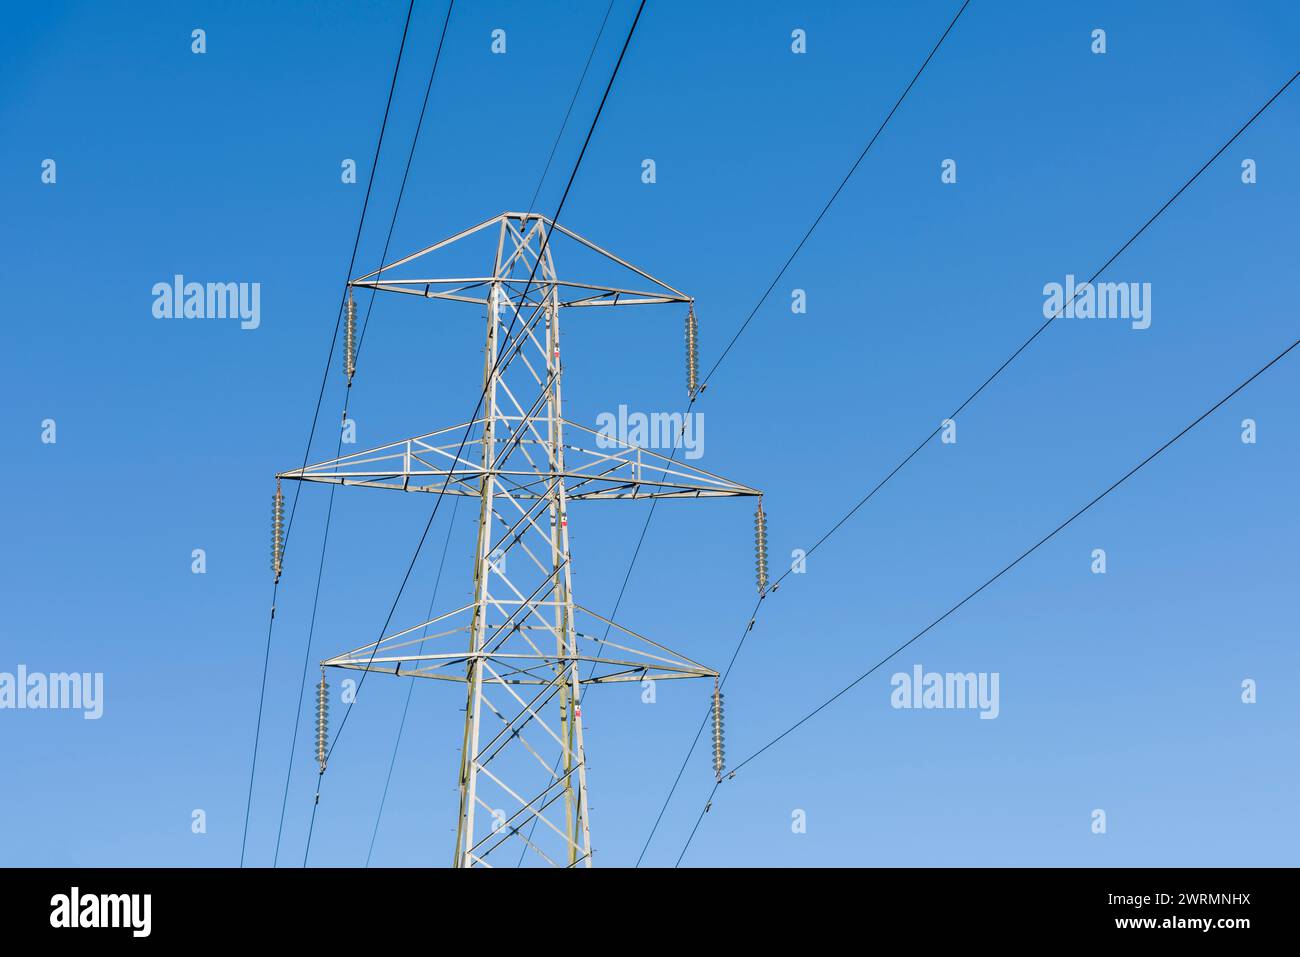 Overhead 132kv electricity transmission cables and transmission tower against a blue sky. Stock Photo